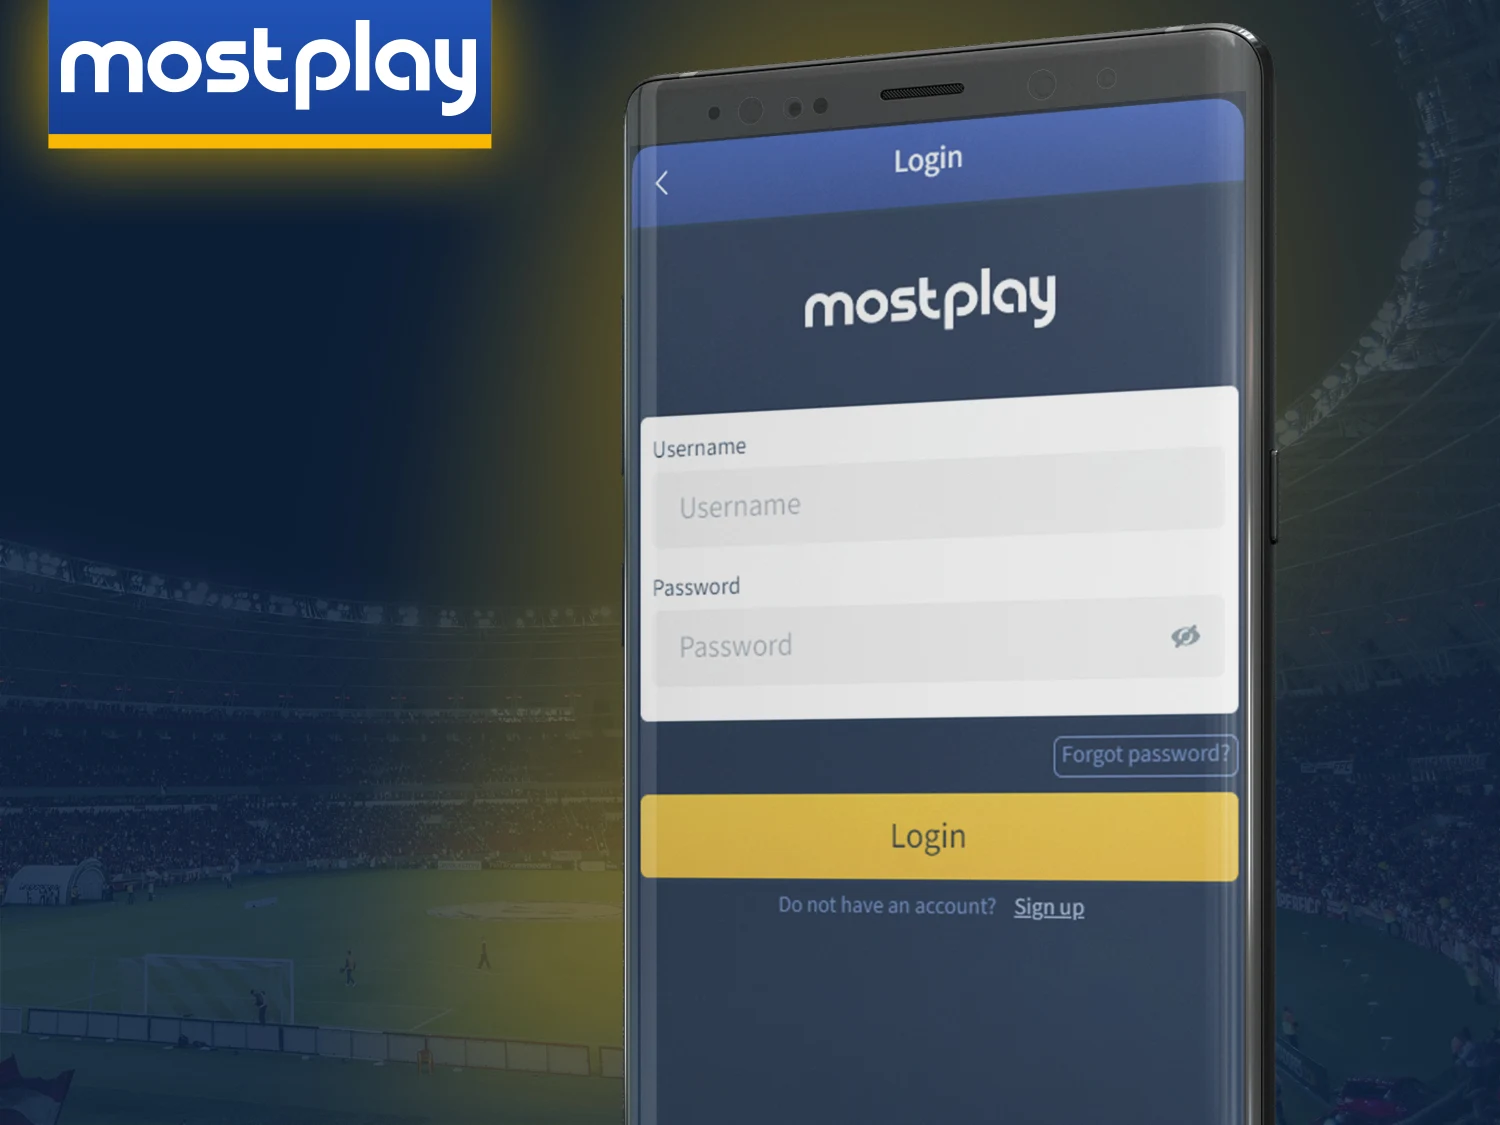 Use your Mostplay account for logging in.